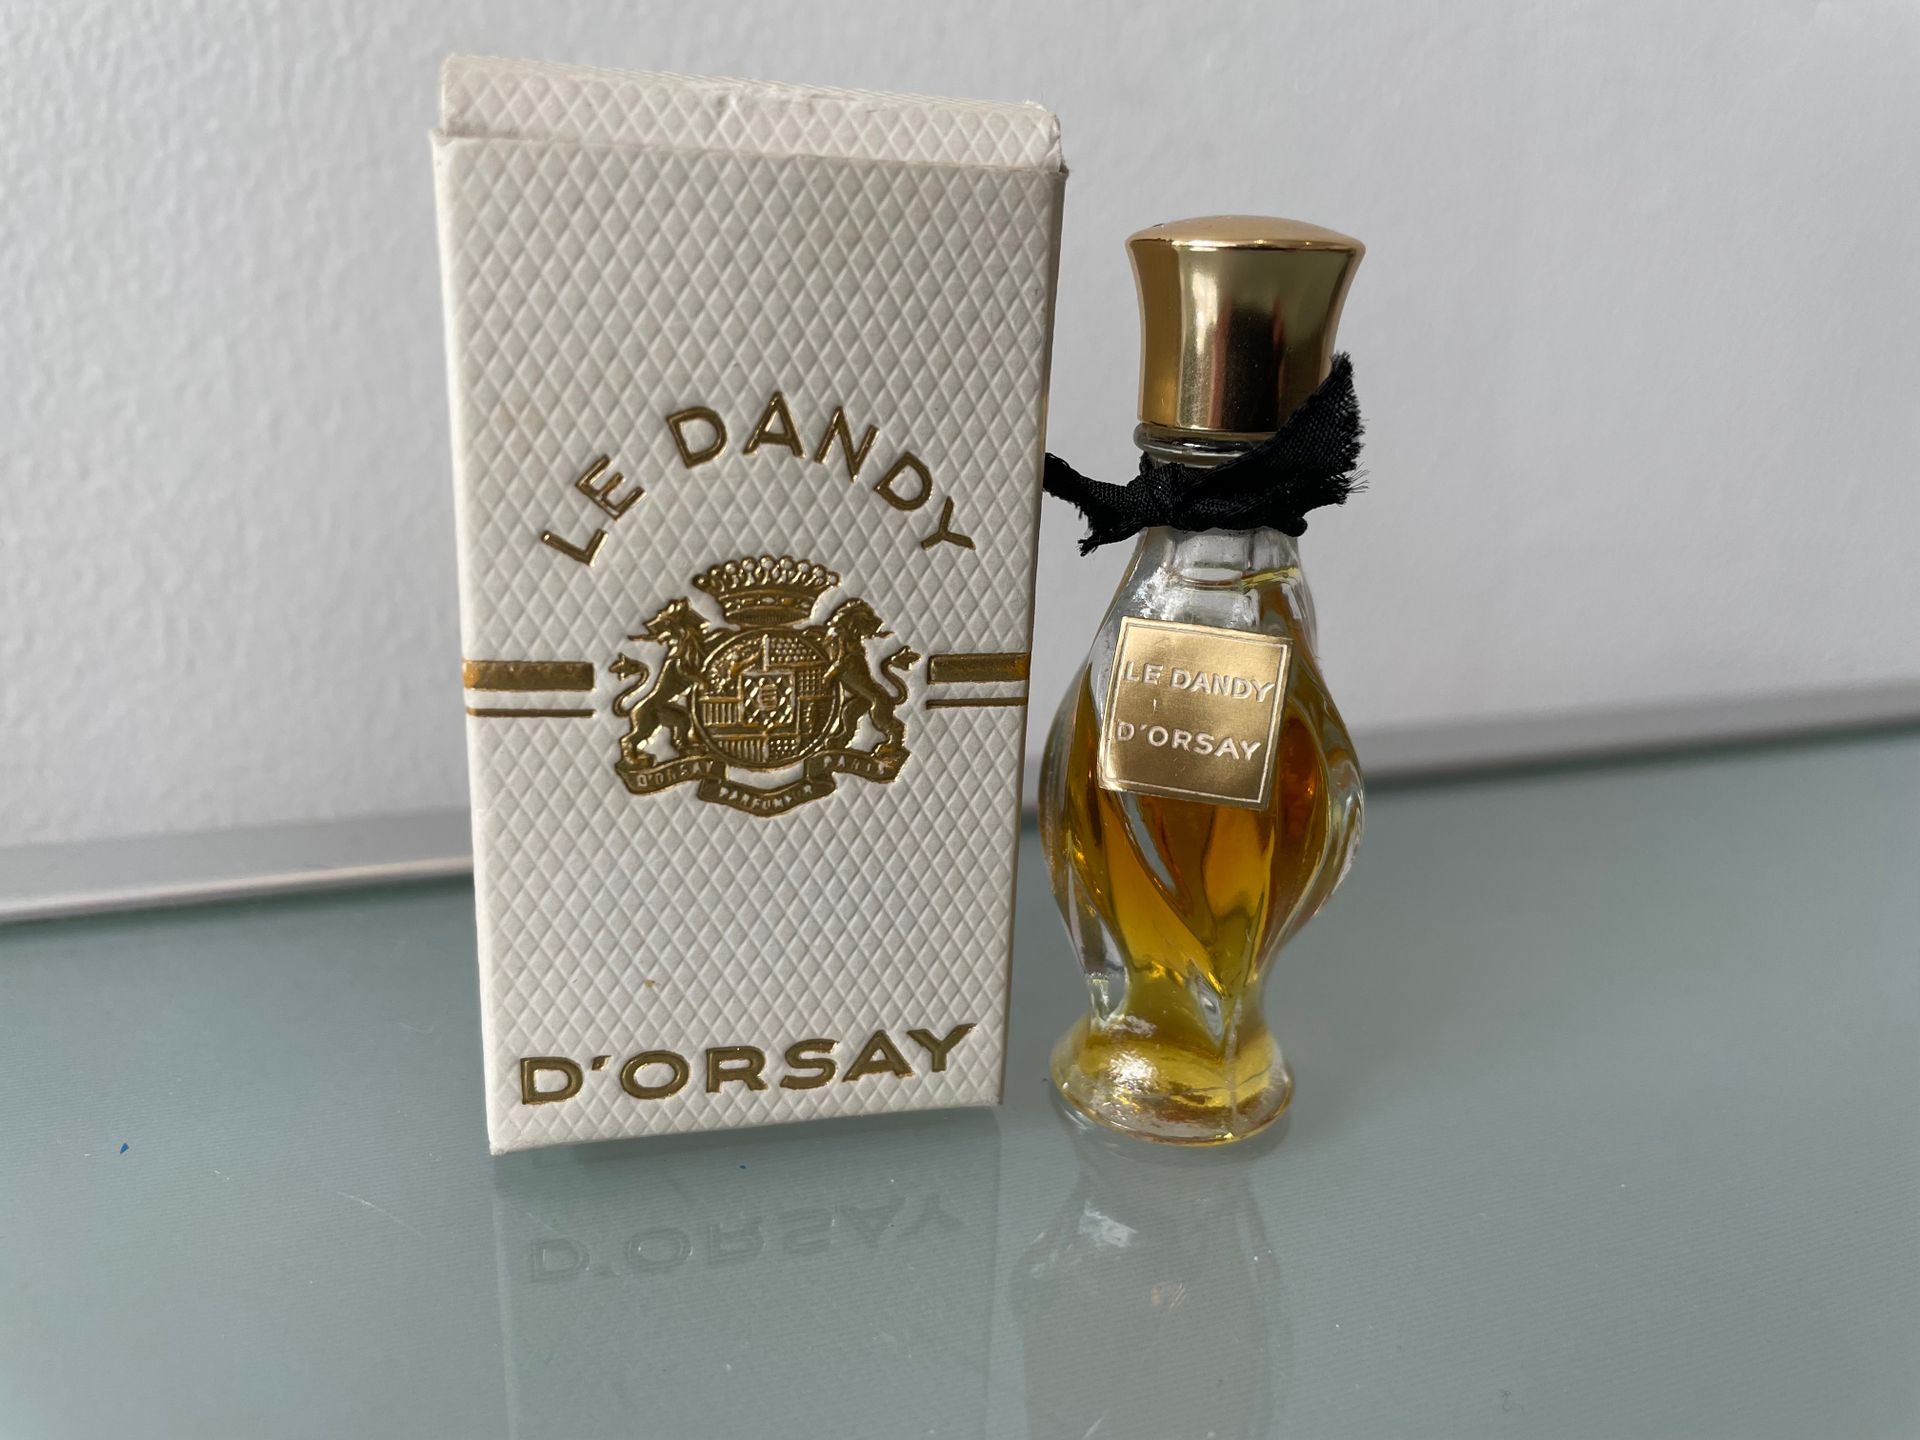 Null D'ORSAY "The Dandy



Rare bottle in this size. Glass bottle, gold label ti&hellip;